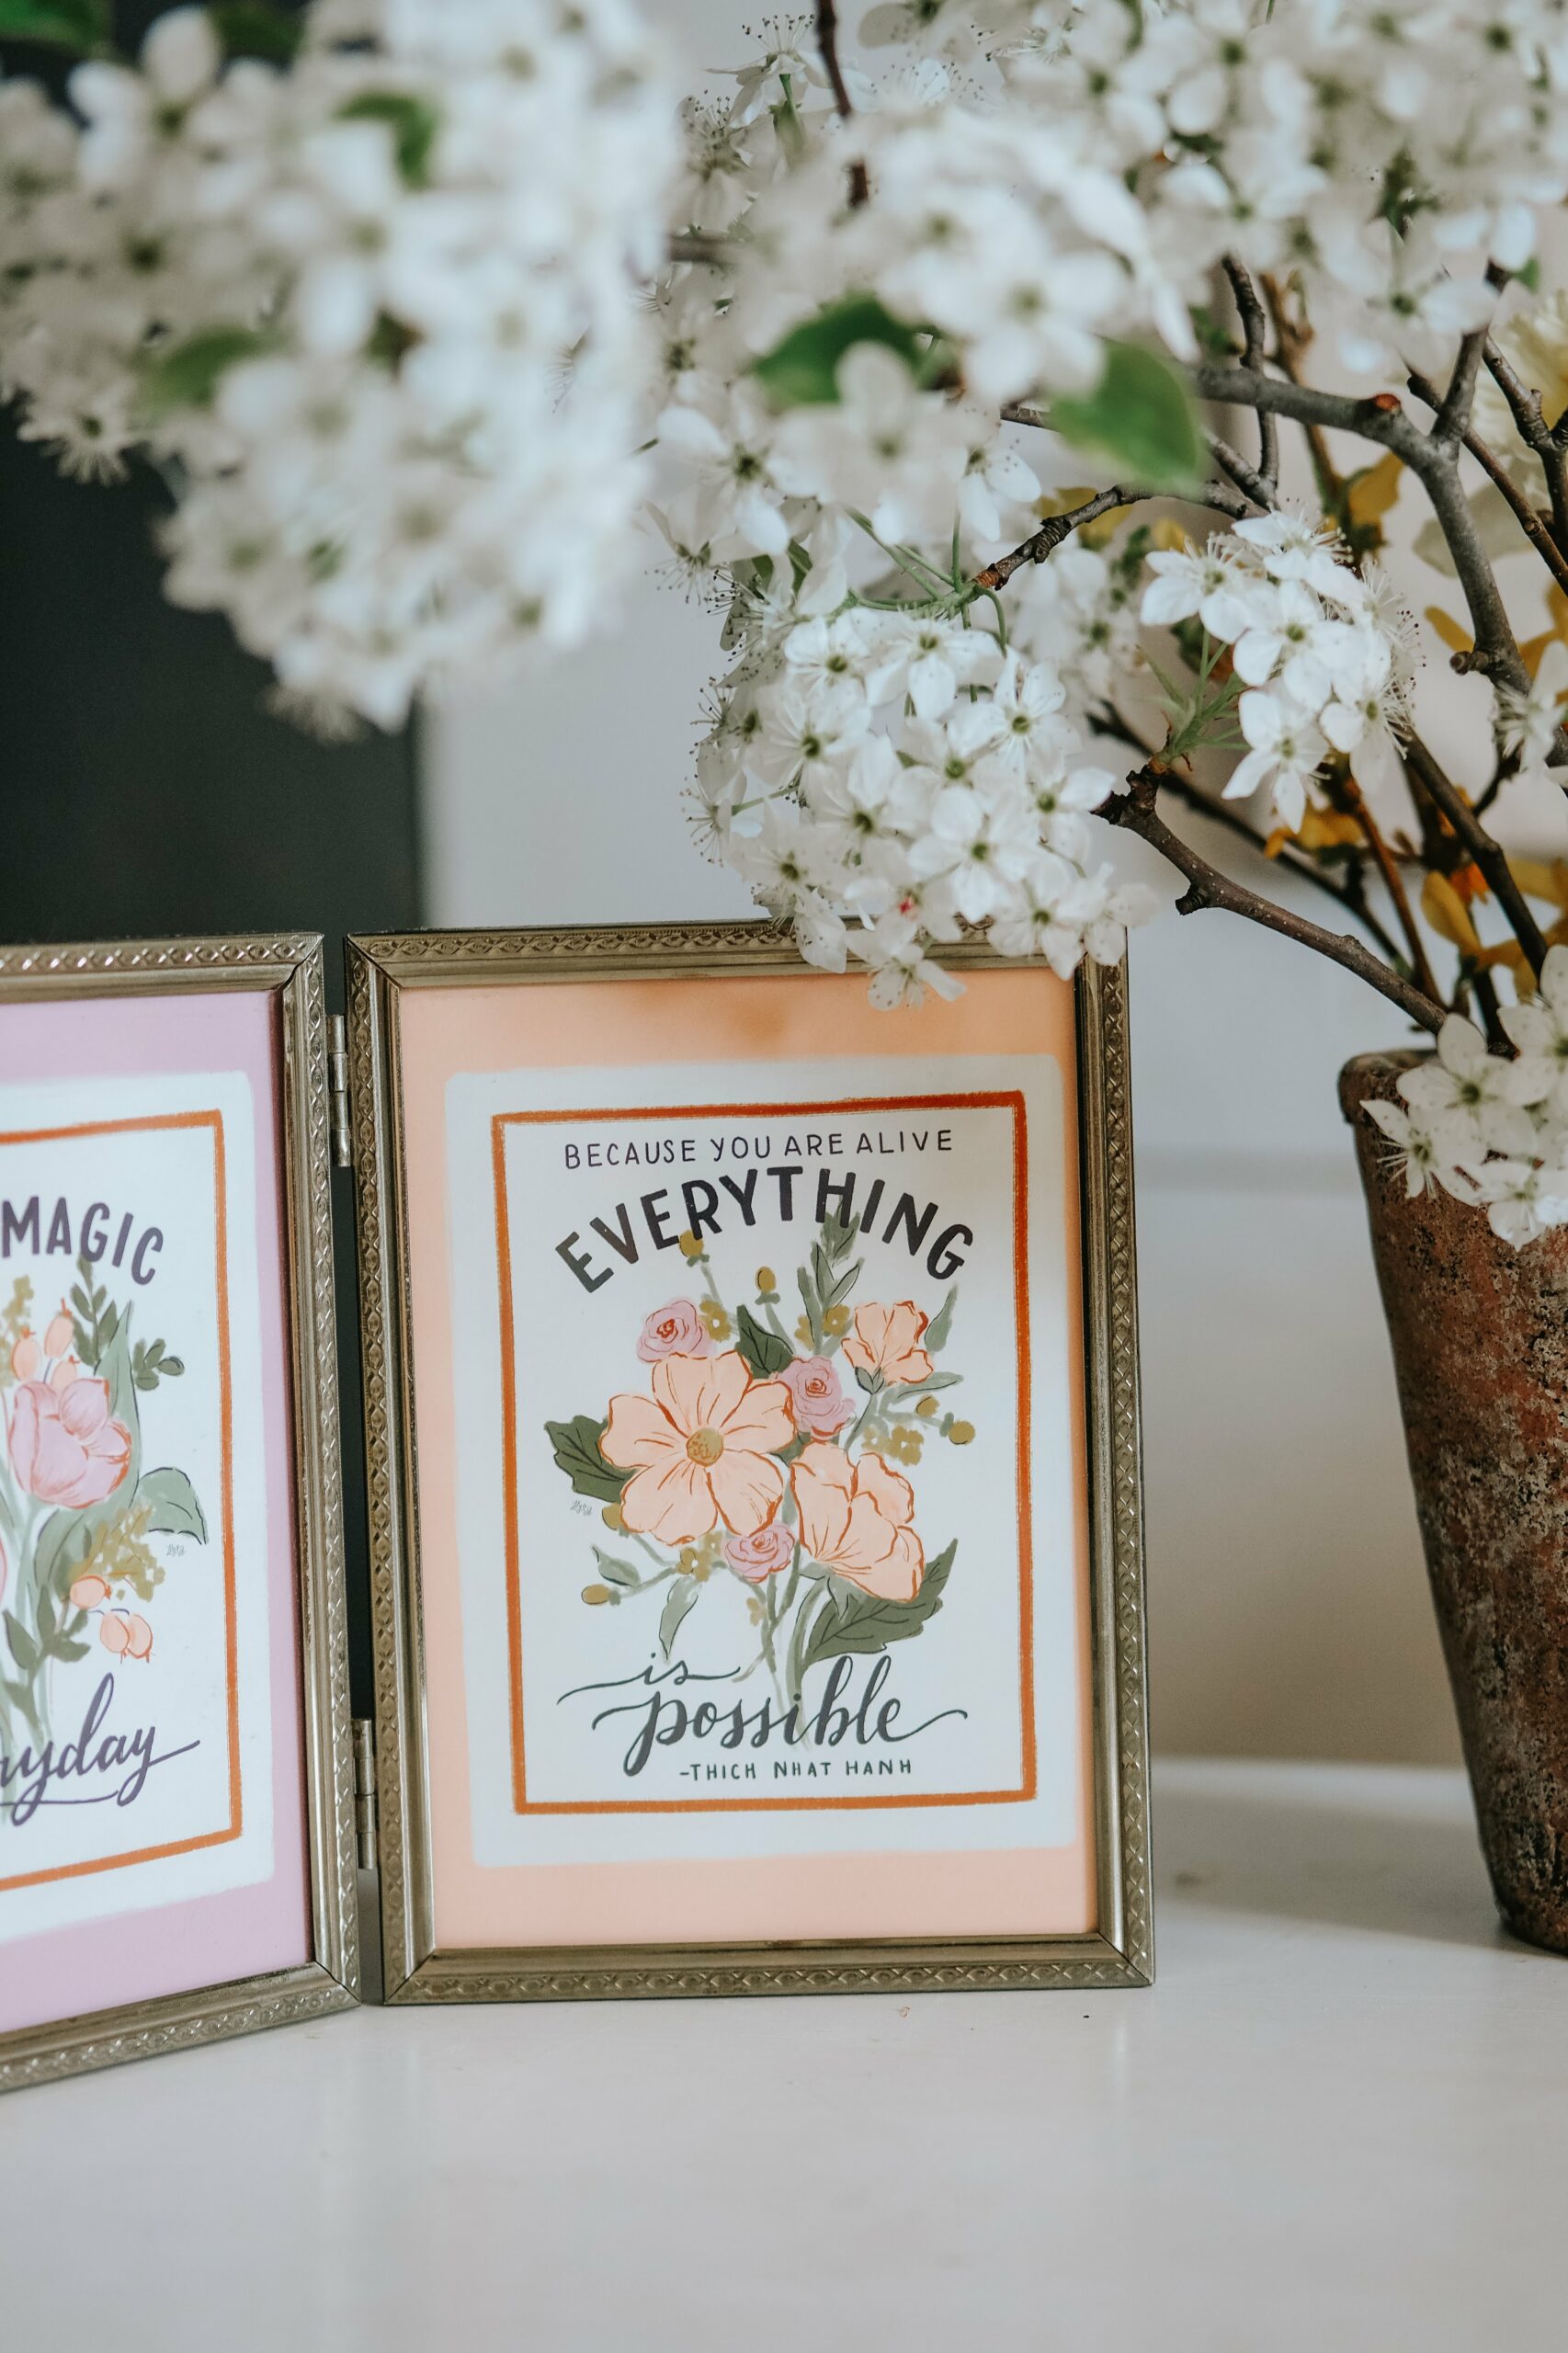 Hand lettered and illustrated prints for your spring Decorating. Hand-drawn by Valerie McKeehan of Lily & Val